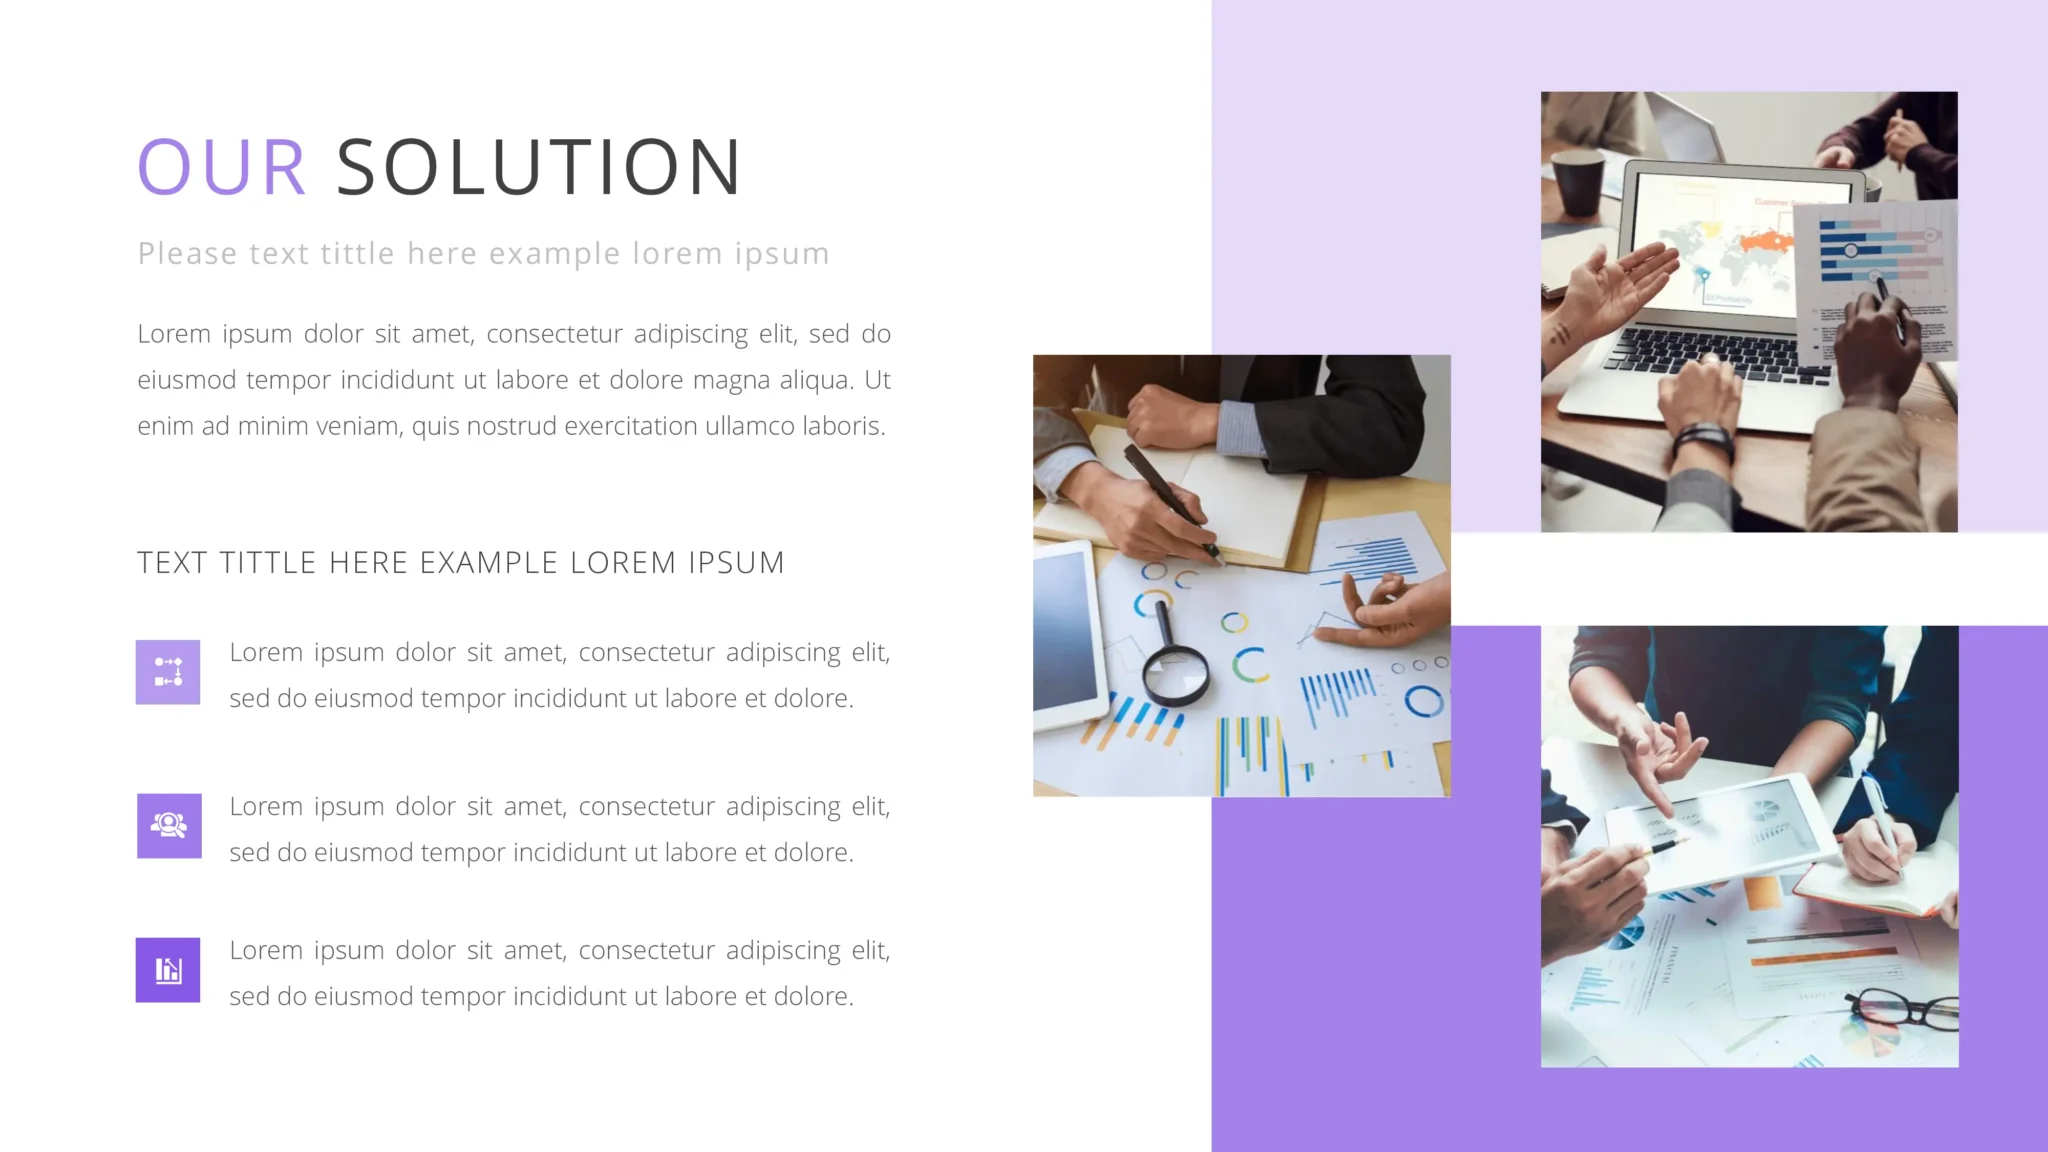 Innovative 'Our Solution' presentation templates with 3 discussing square-shaped company images and impactful contents.